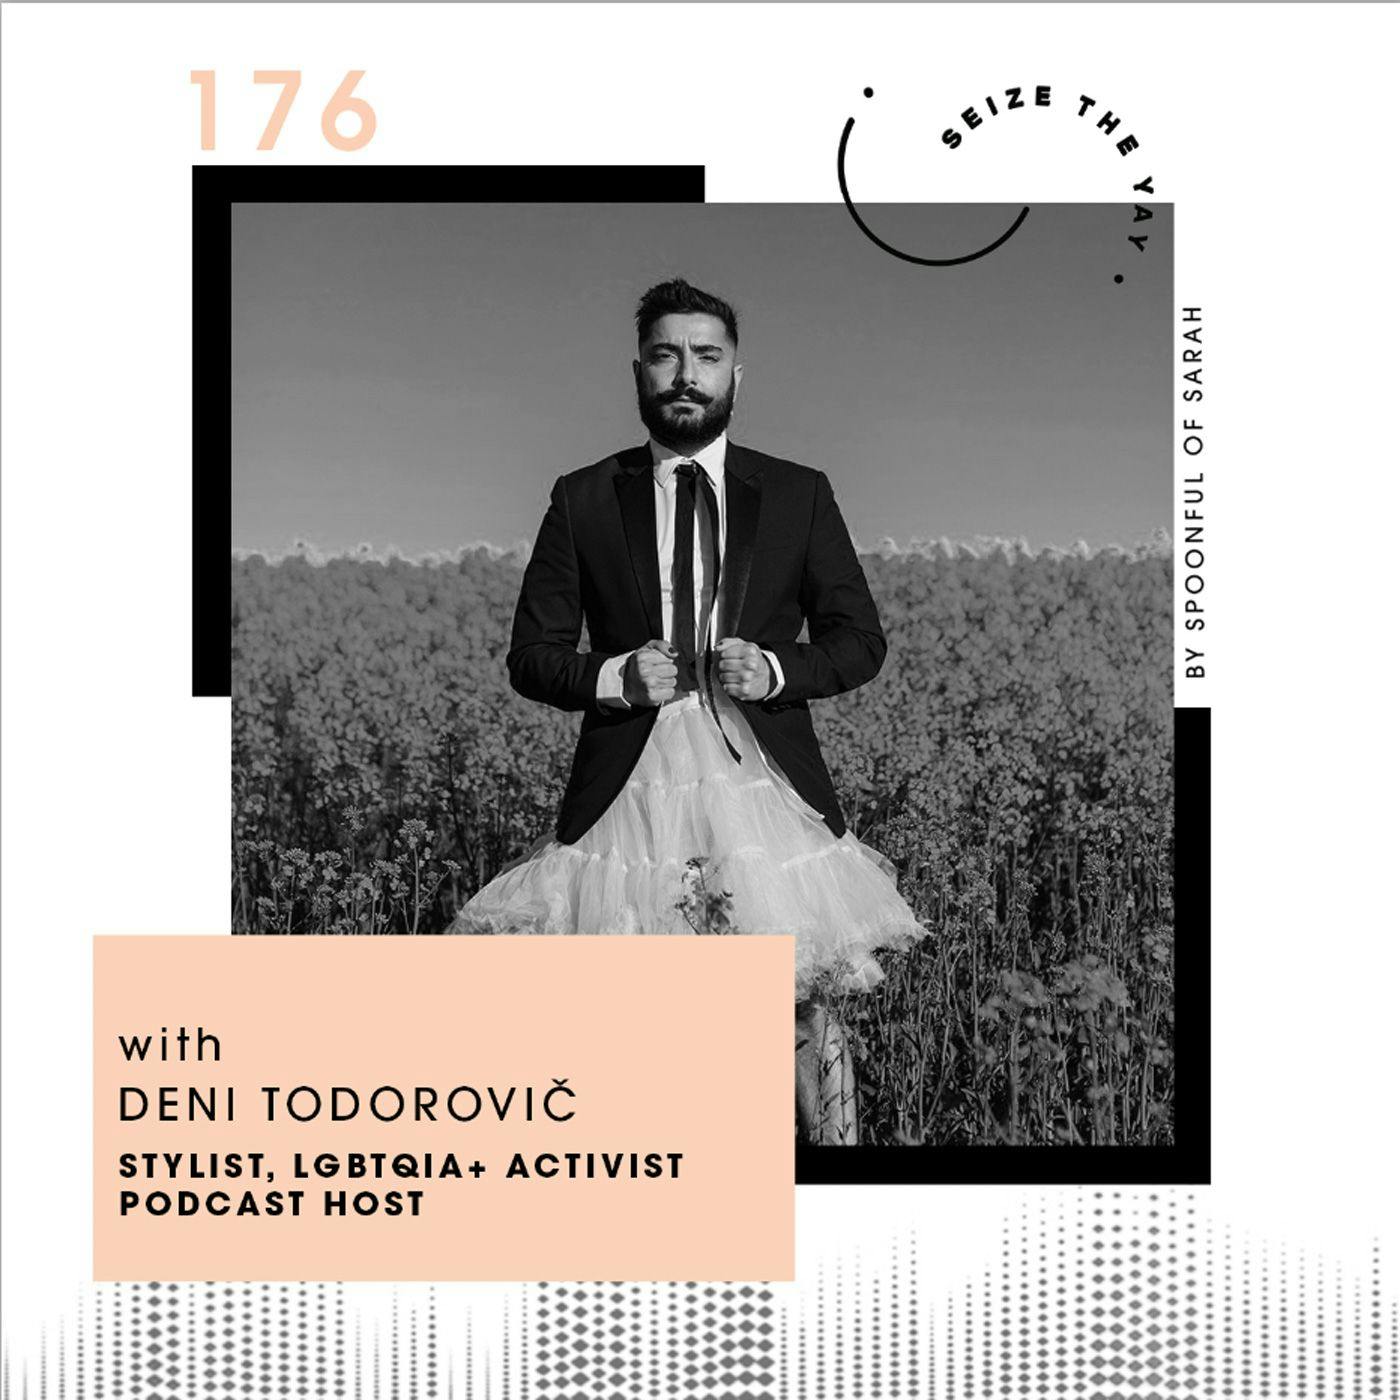 Deni Todorovič // On style, sexuality, and striving for self-acceptance